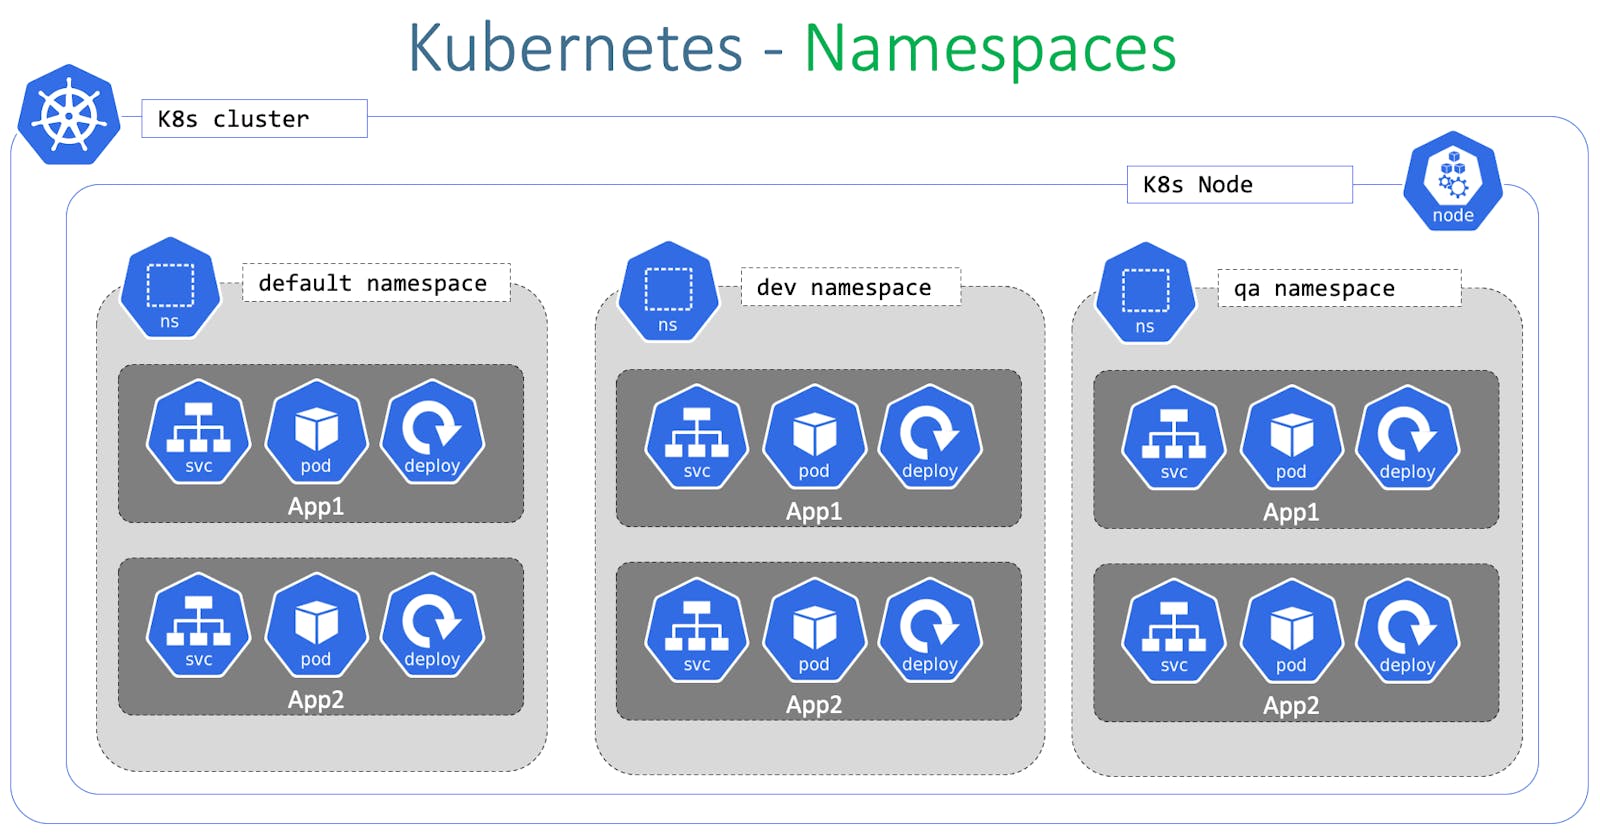 What is a Kubernetes Namespace?